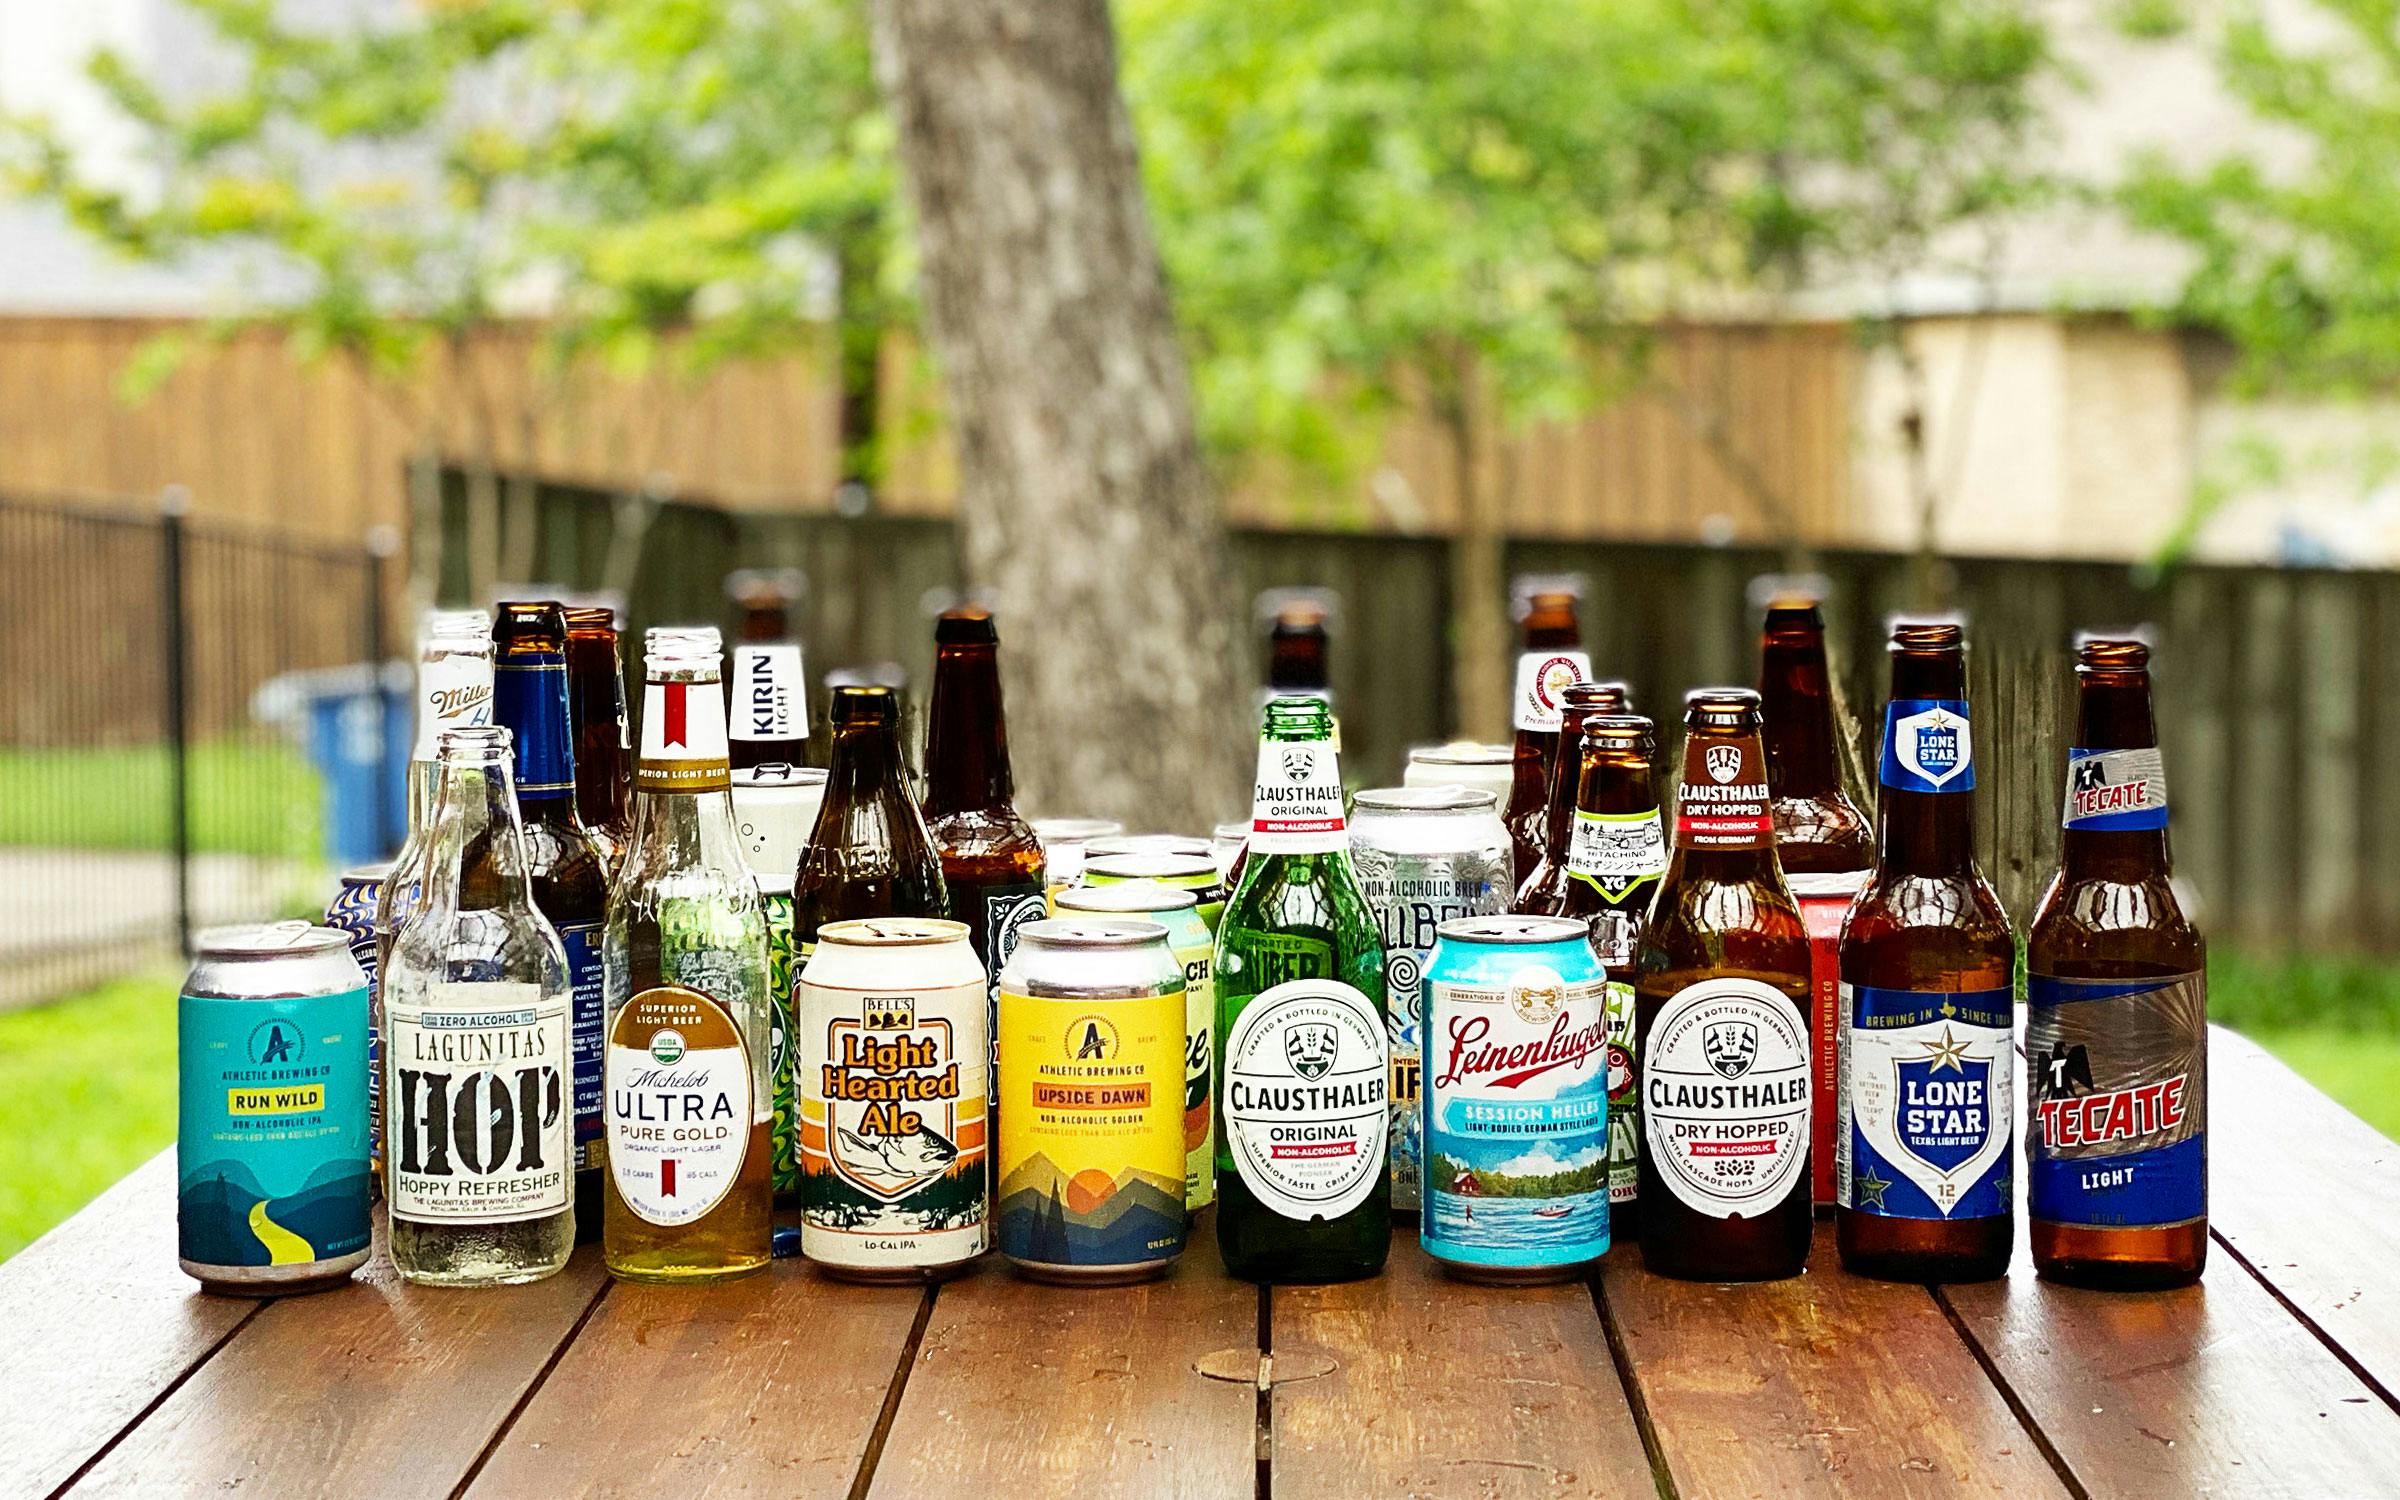 https://img.texasmonthly.com/2021/05/bbq-low-abv-beers-1.jpg?auto=compress&crop=faces&fit=fit&fm=pjpg&ixlib=php-3.3.1&q=45